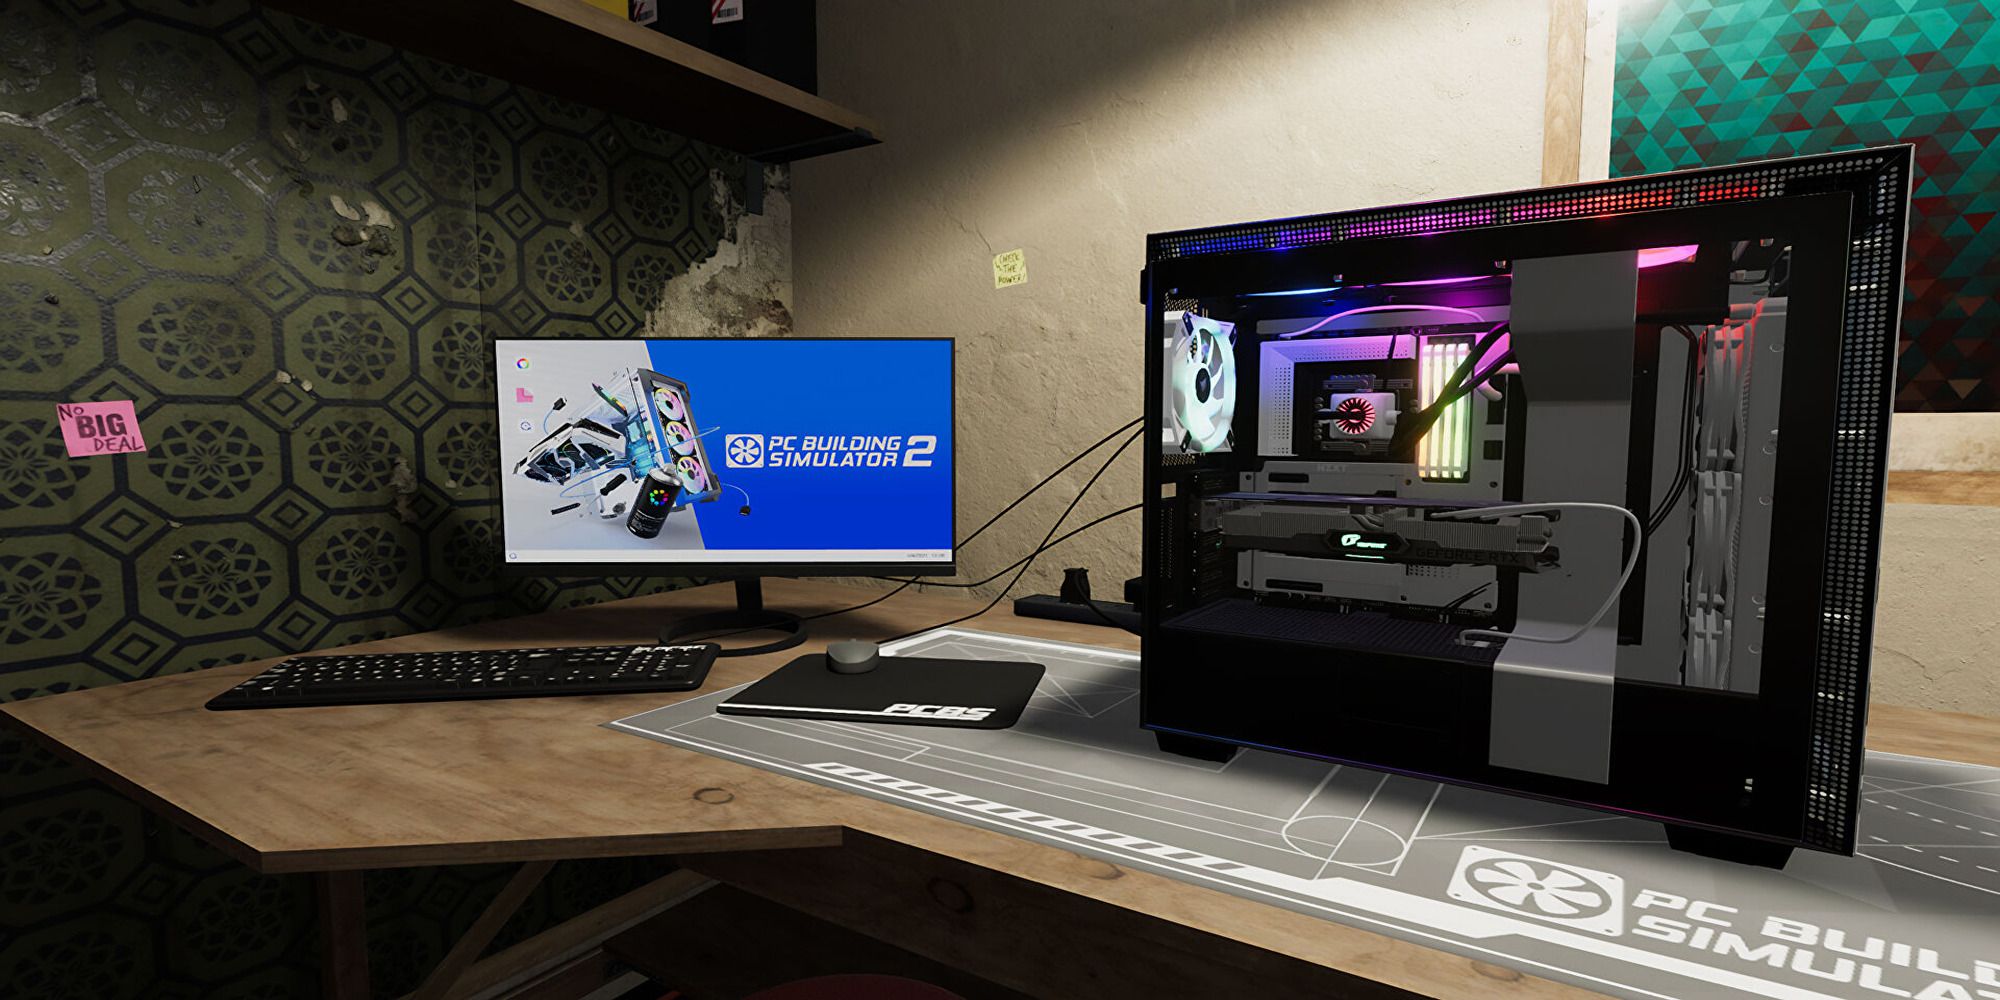 A fully built gaming PC connected to a monitor and peripherals